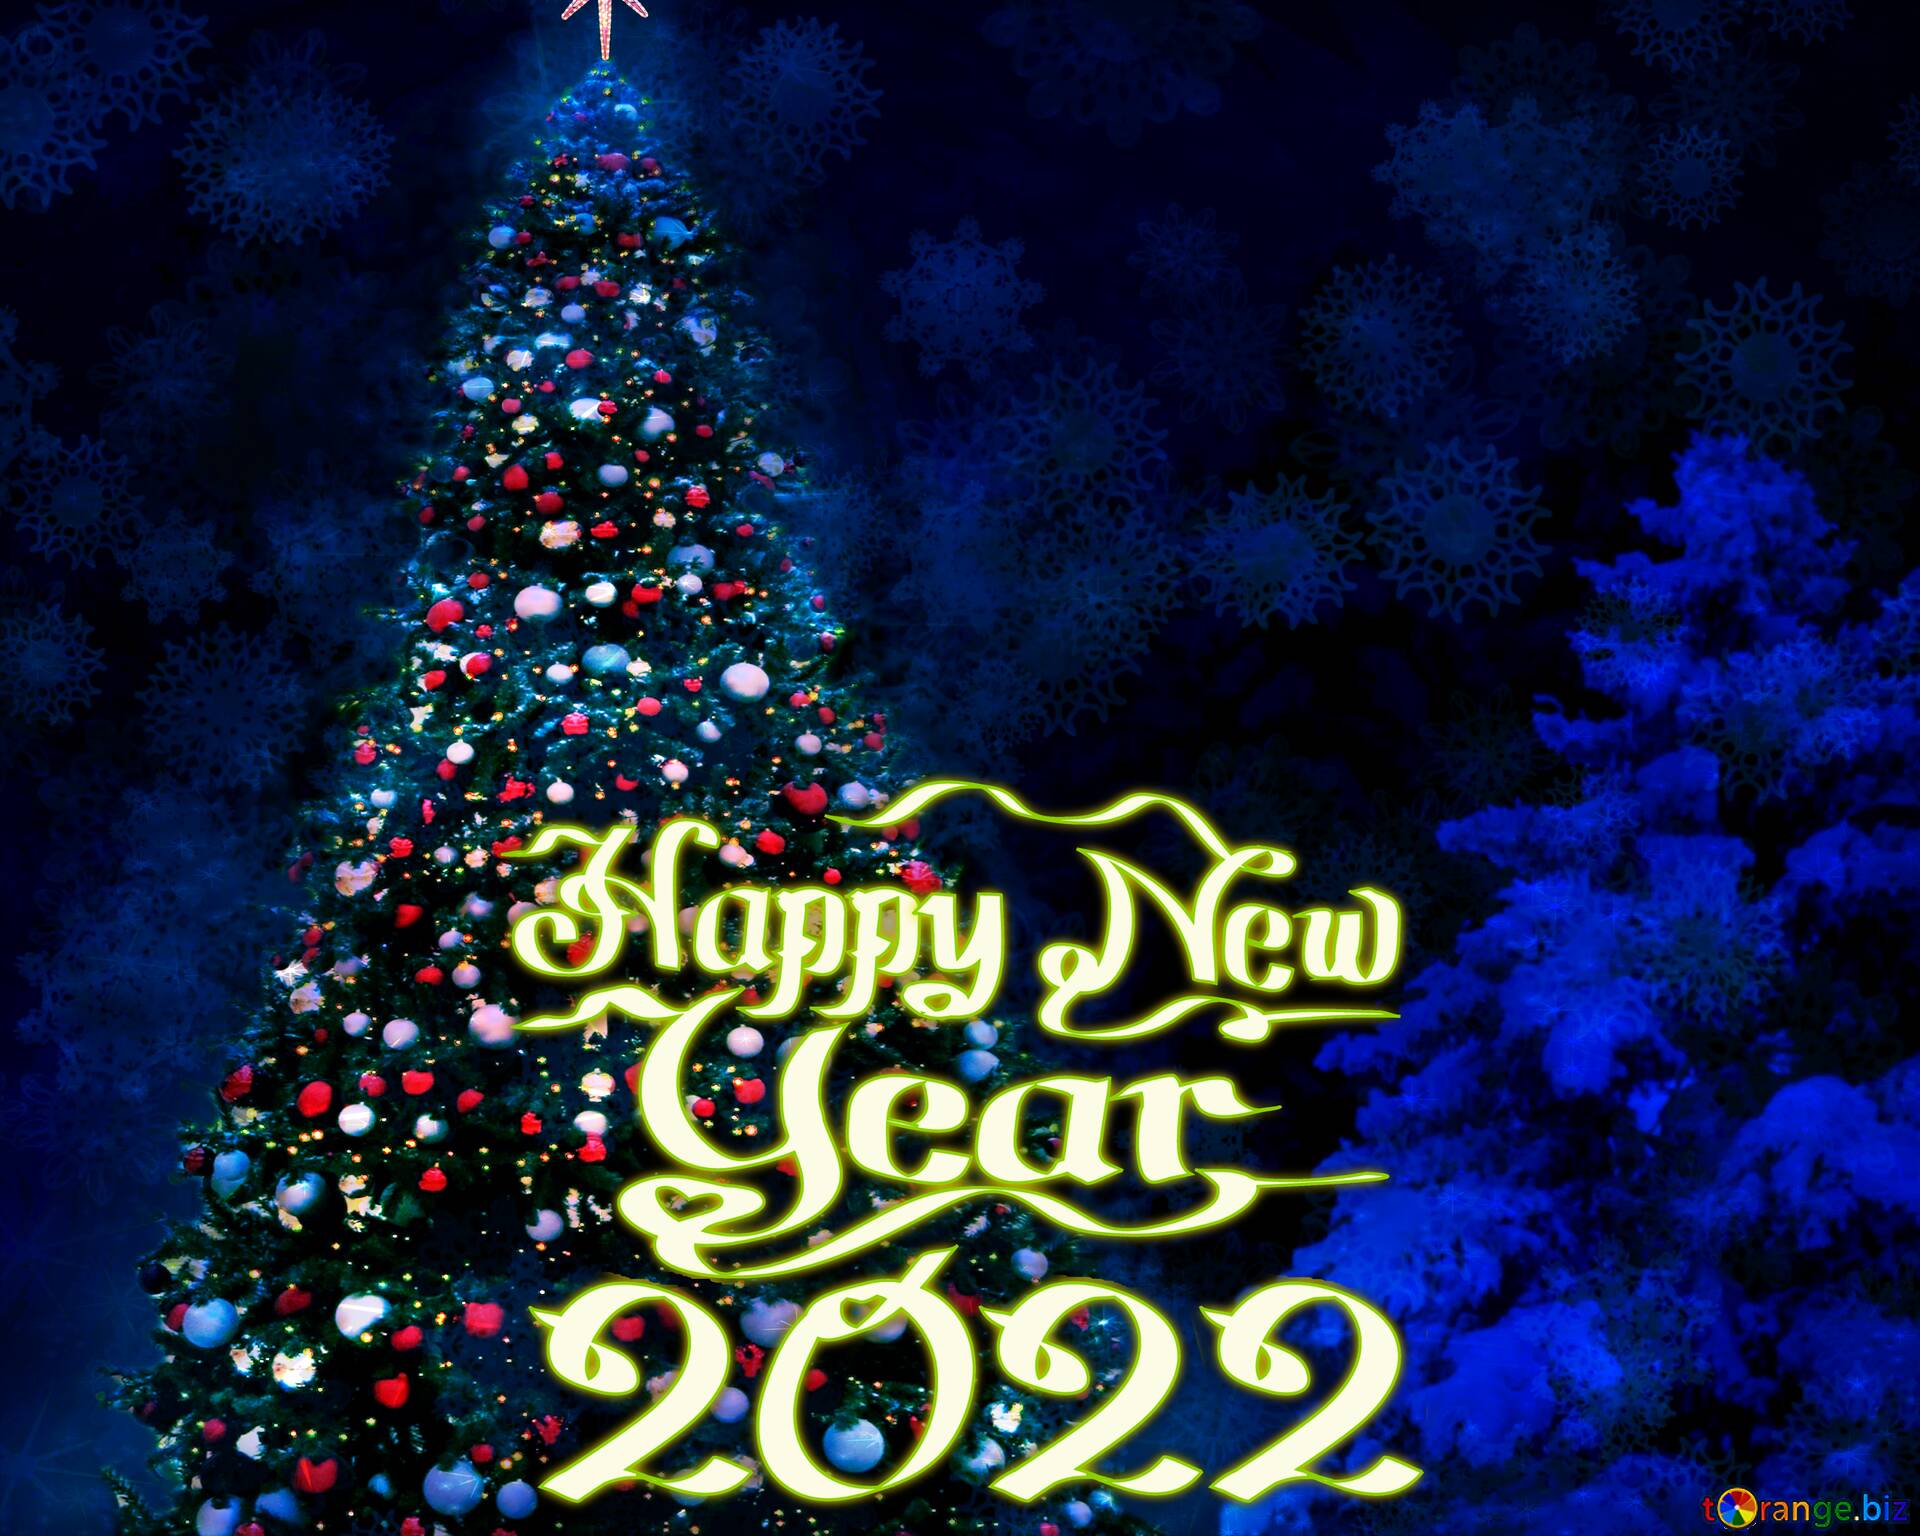 Download Free Picture Christmas Tree Happy New Year 2022 Background On CC BY License Free Image Stock TOrange.biz Fx №216471